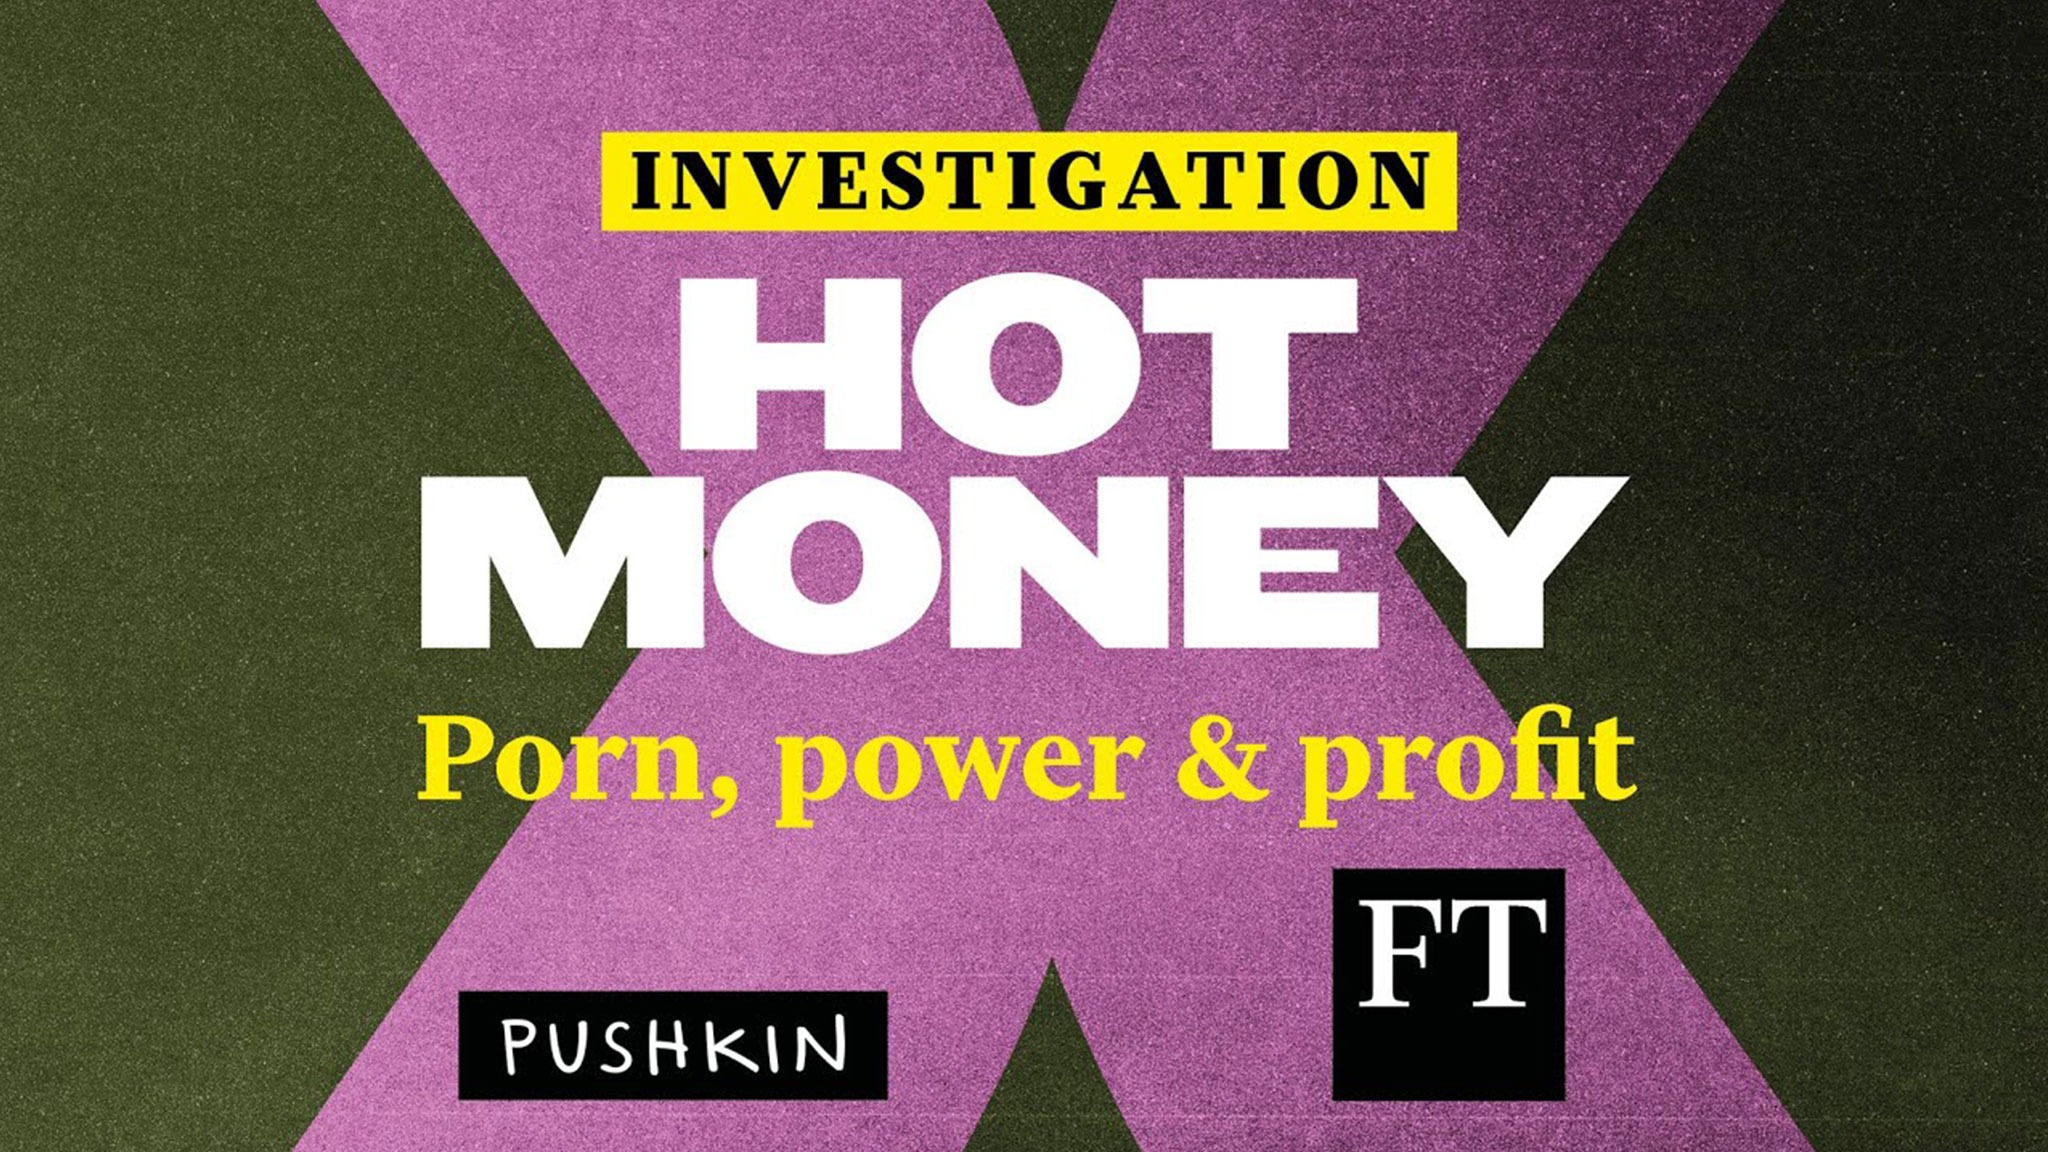 Over The Hedge Gay Porn - Porn meets the internet | Financial Times